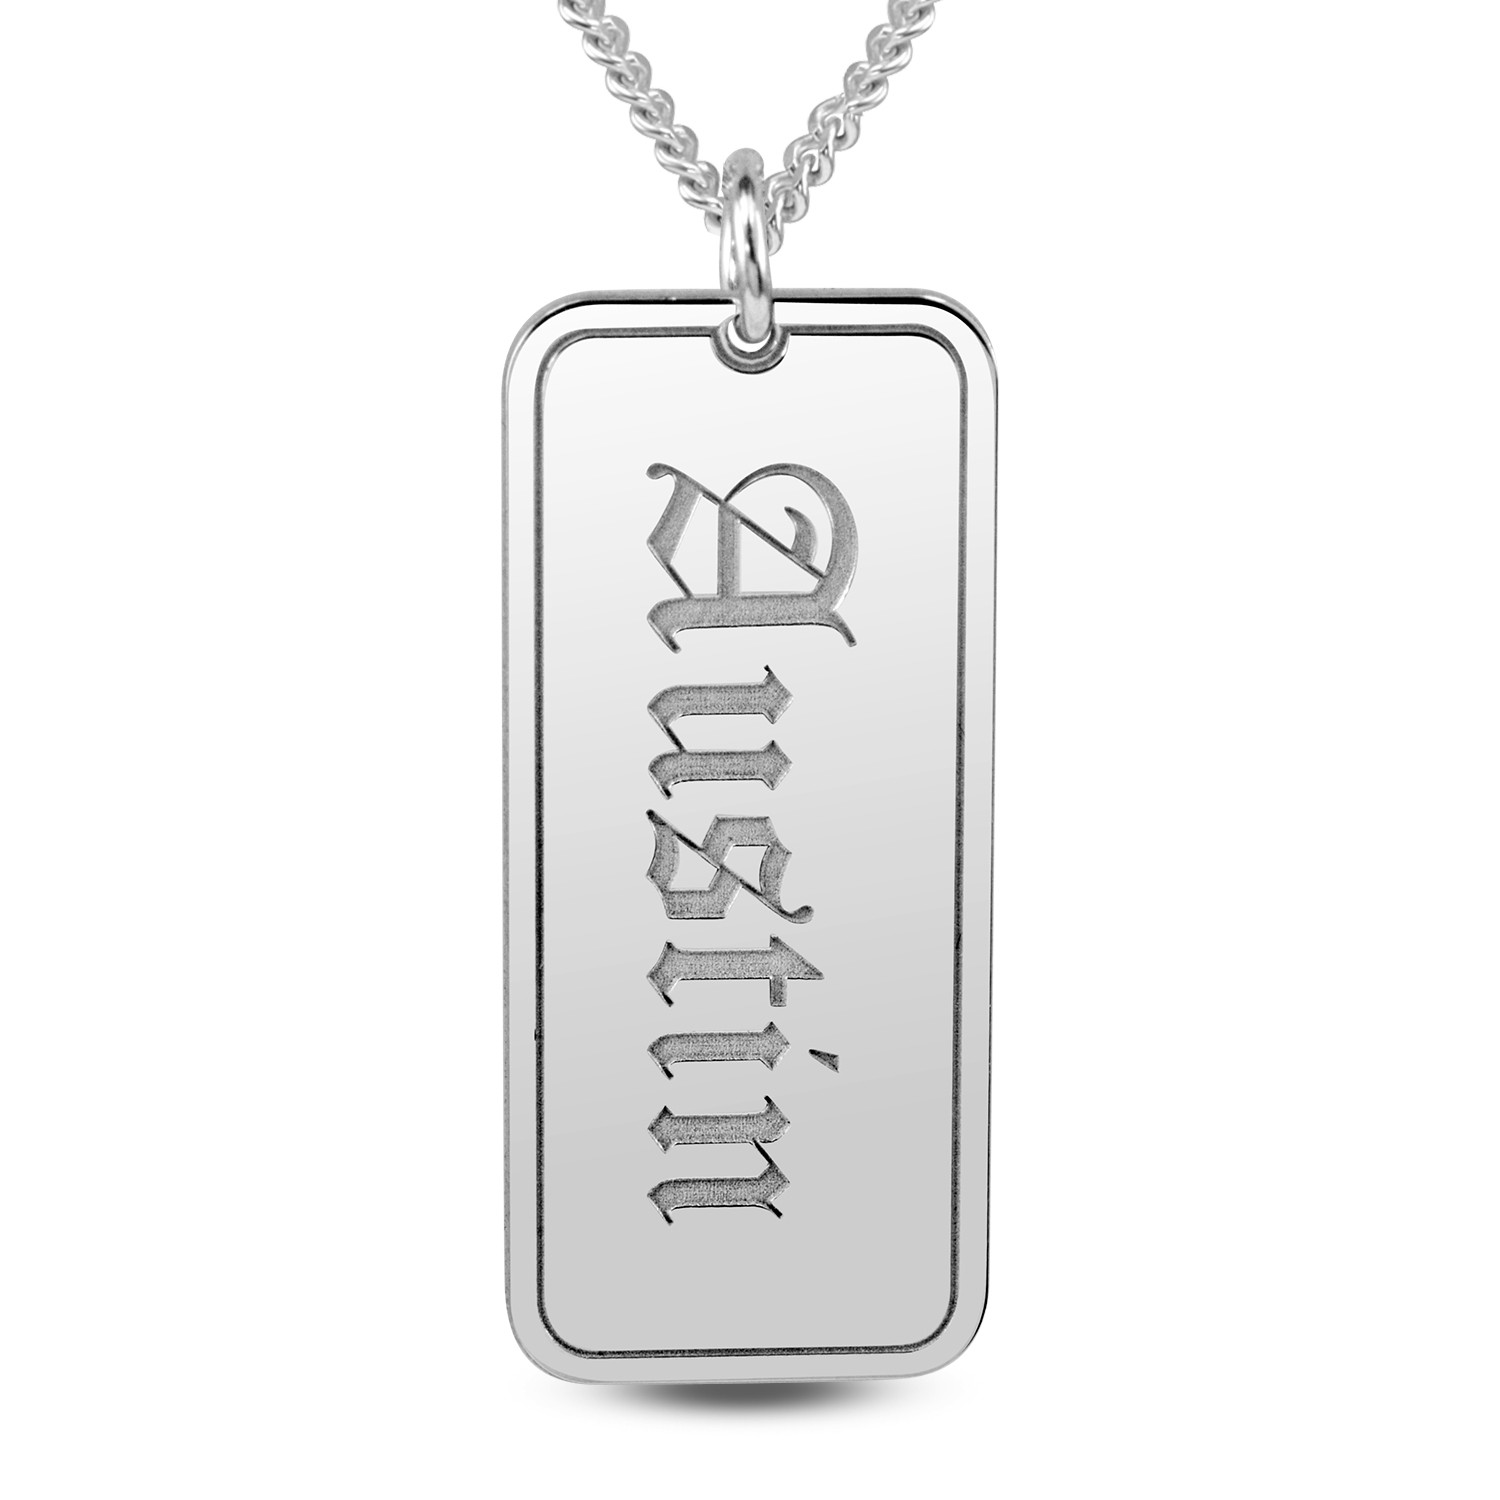 Brilliance Fine Jewelry Men's Gold-Tone Stainless Steel Cubic Zirconia Dog Tag Pendant Necklace - Each